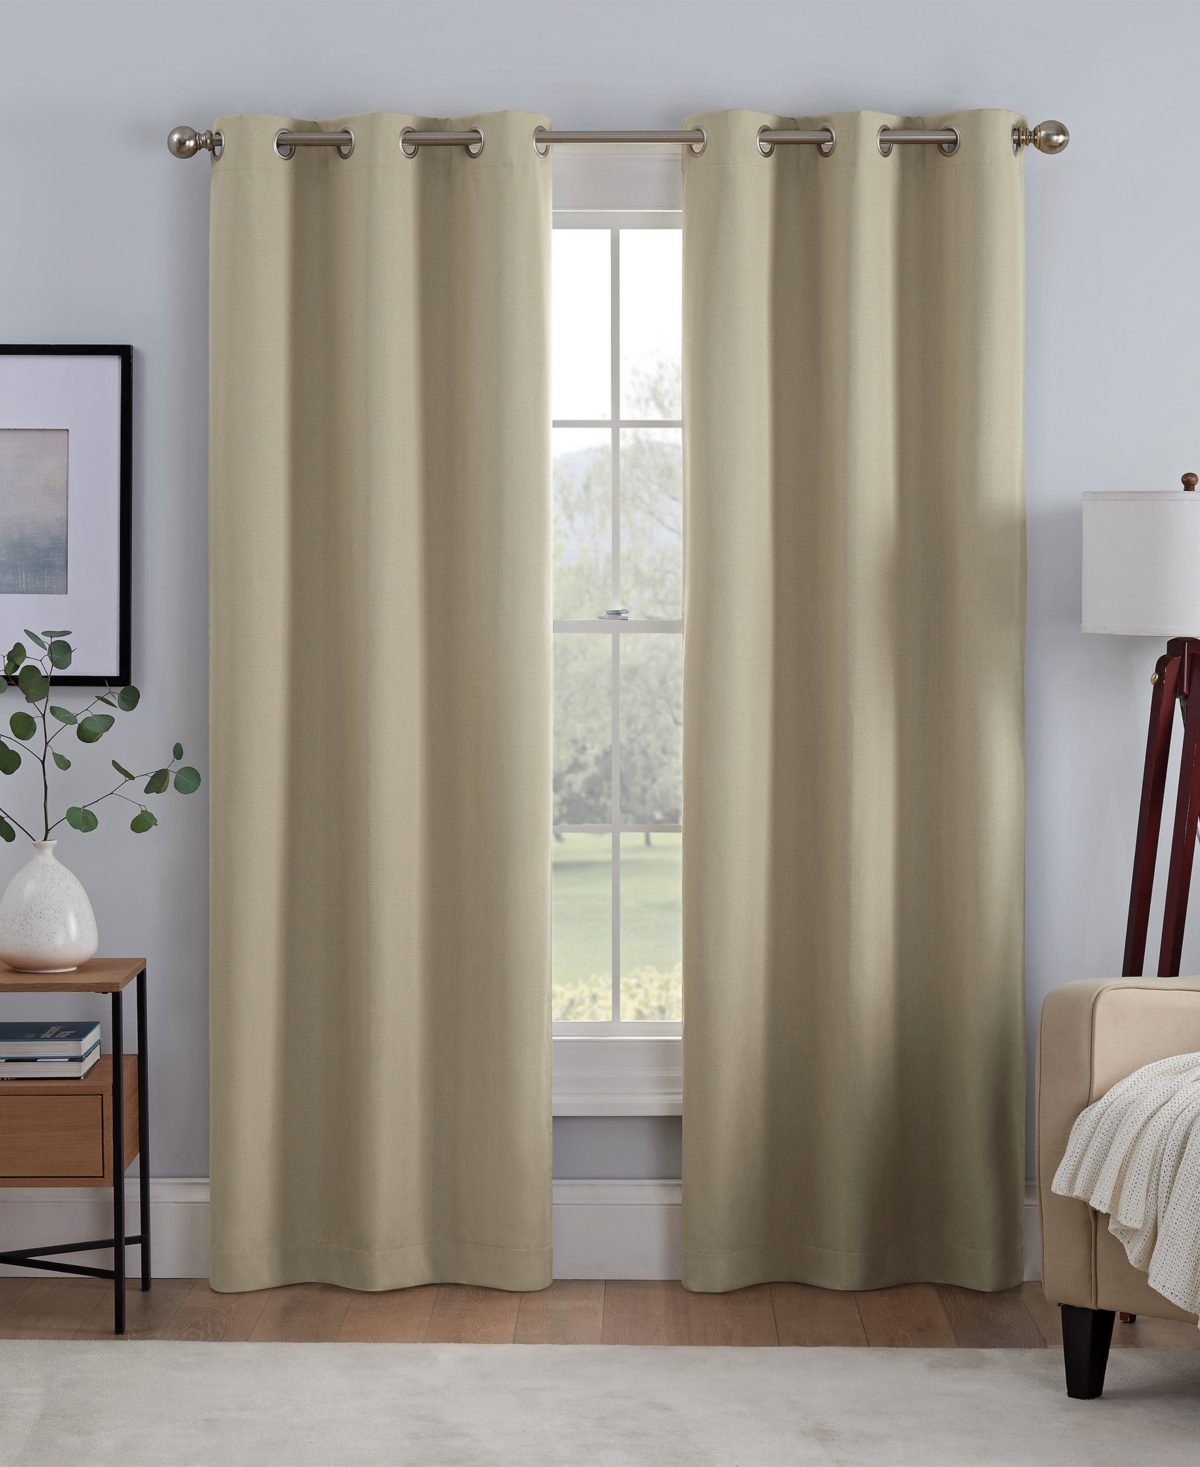 Eclipse Khloe 100% Absolute Zero Blackout Solid Textured Thermaback Curtain Panel, 63" X 40" In Tan